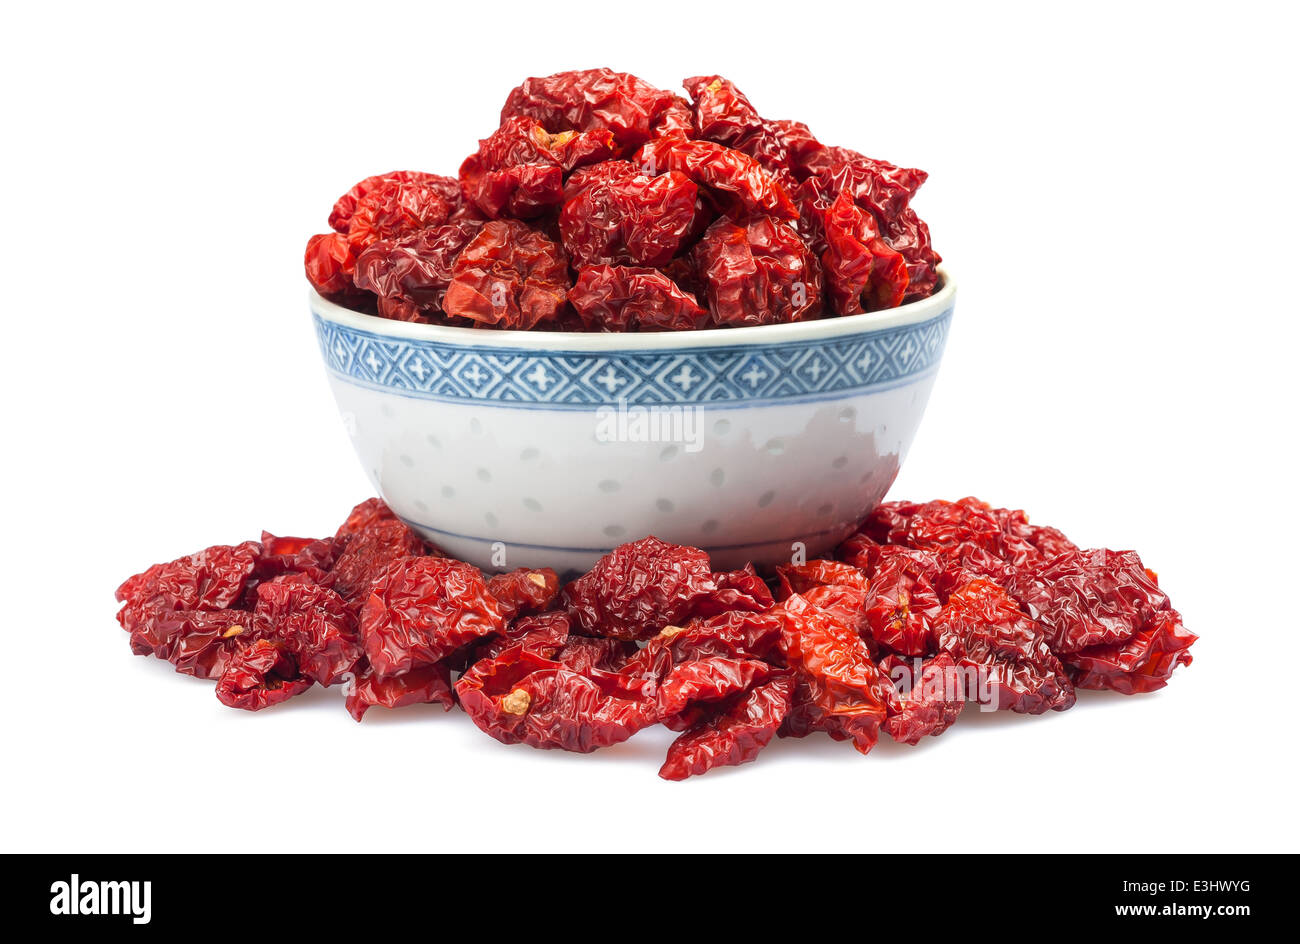 Dried tomatoes in a cup isolated on white background. Stock Photo